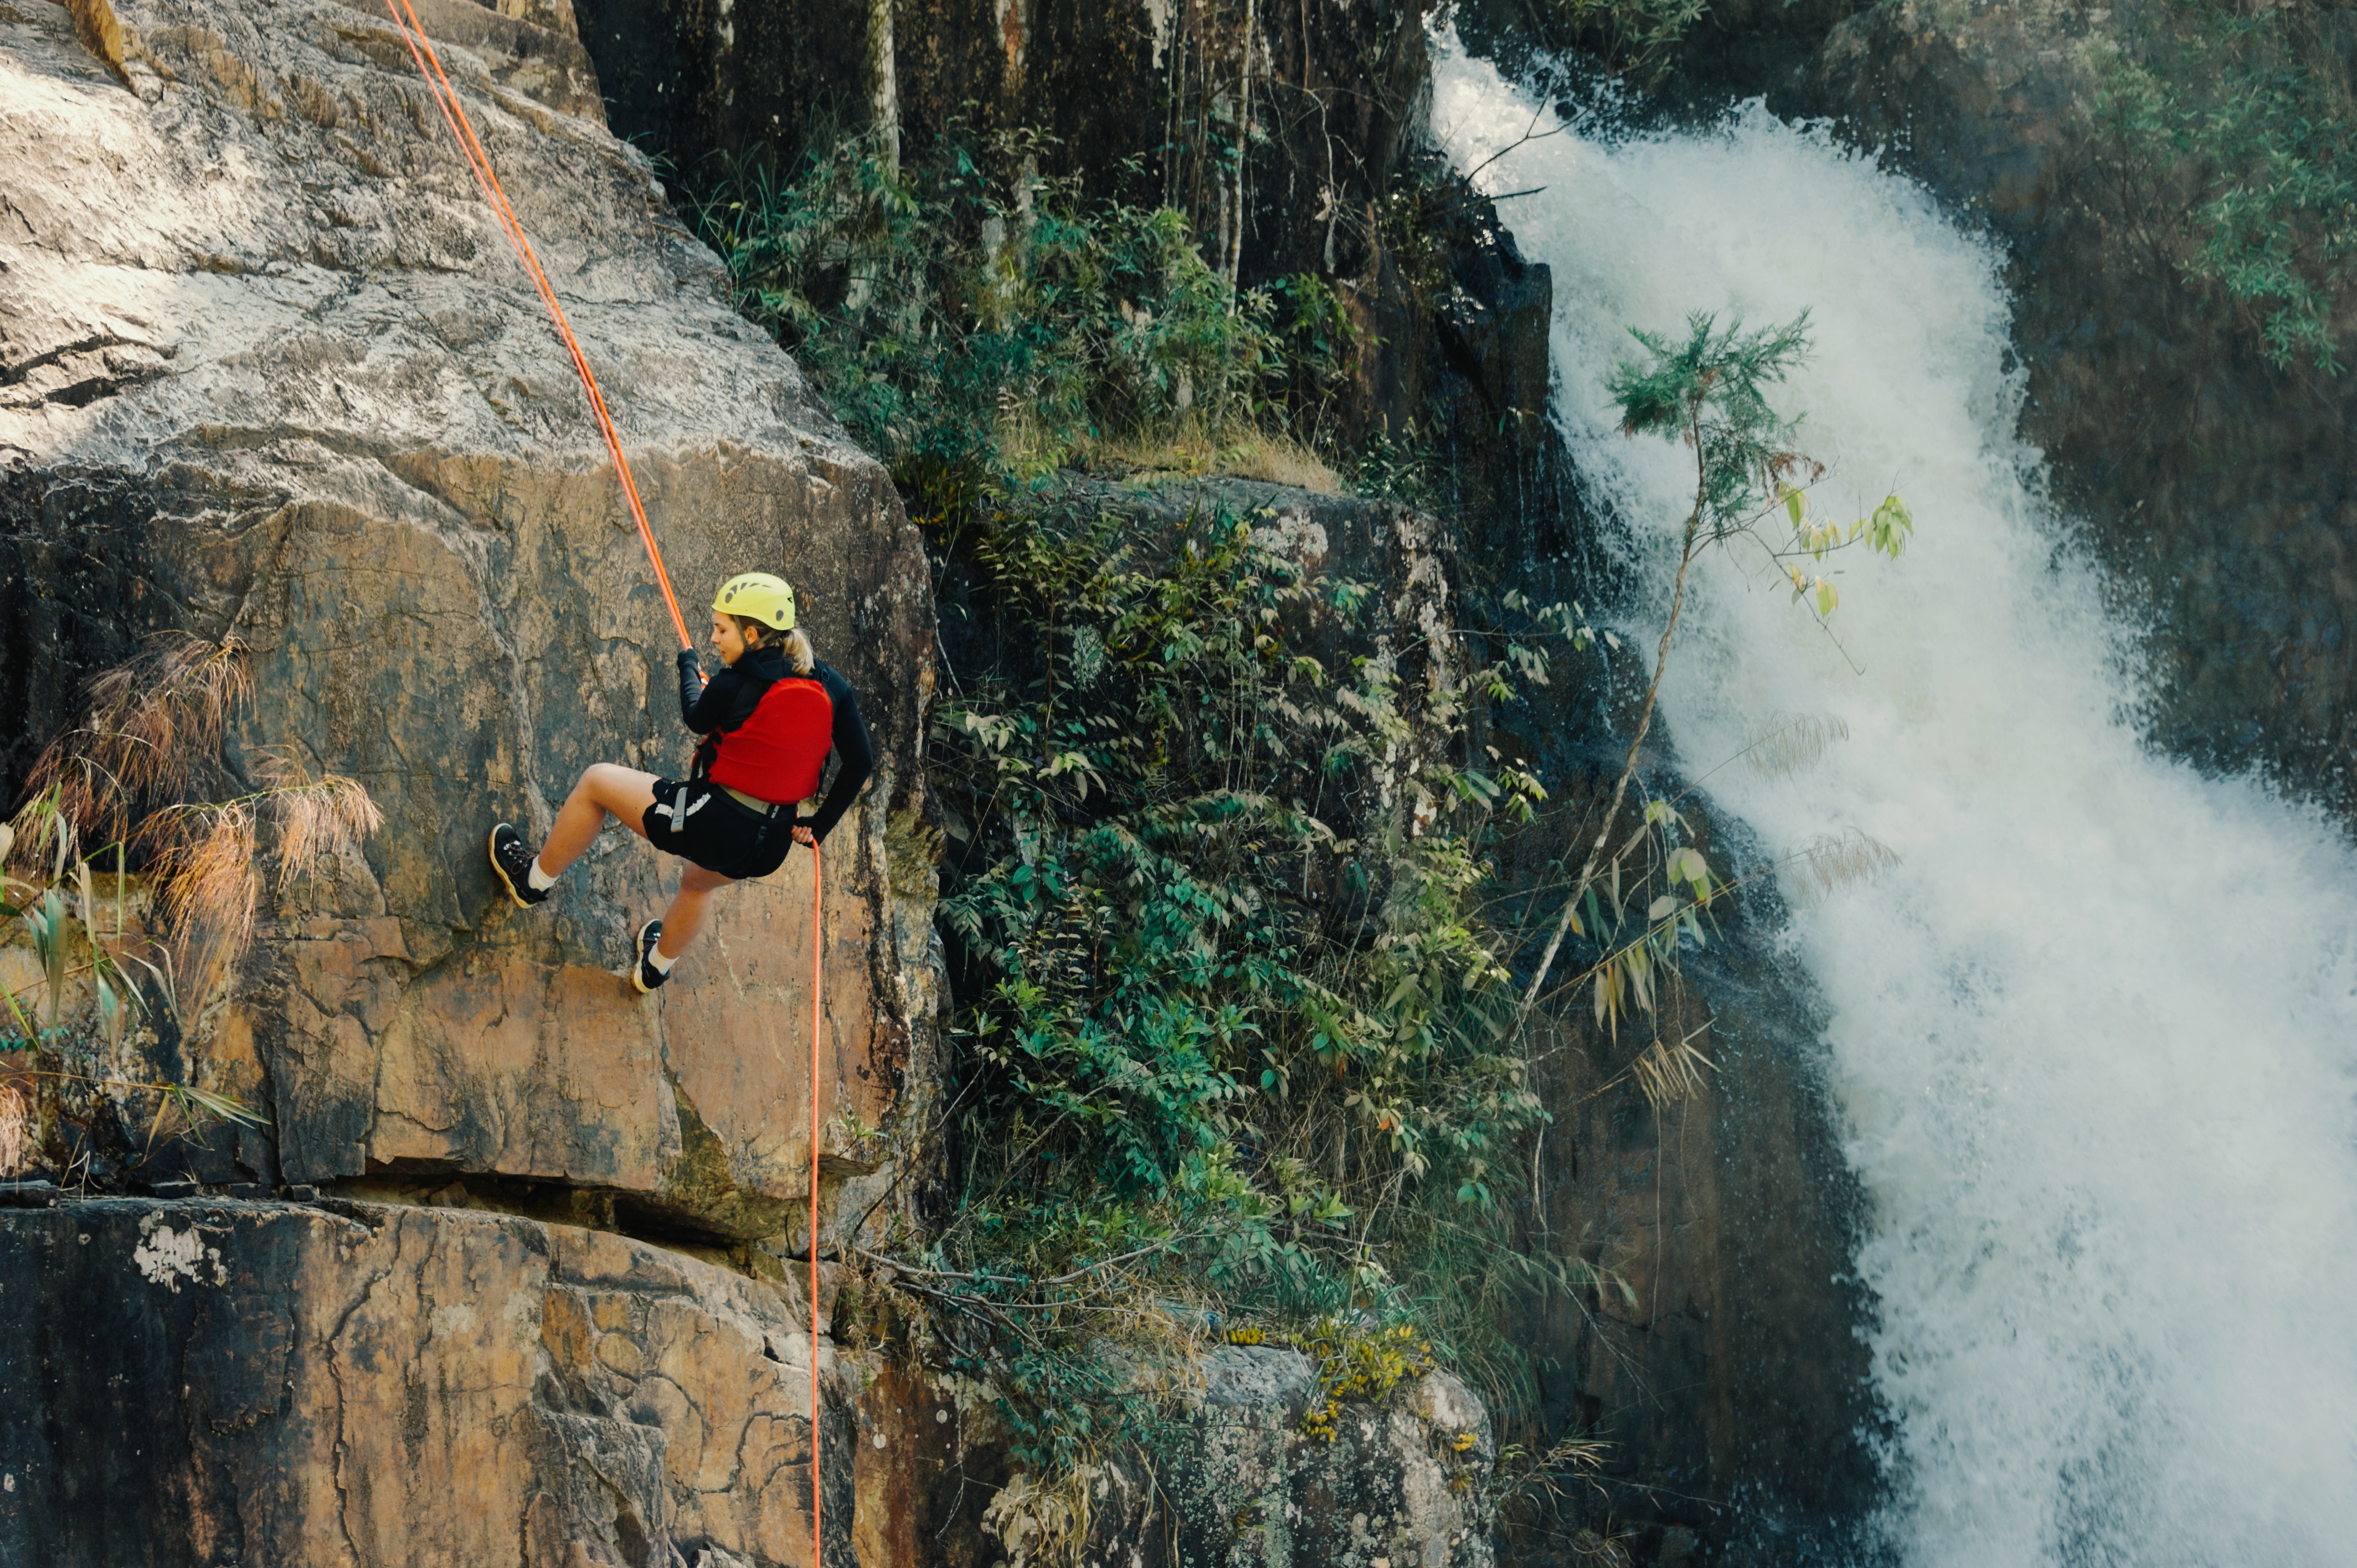 Man rockclimbing up a mountain with a waterfall next to him.